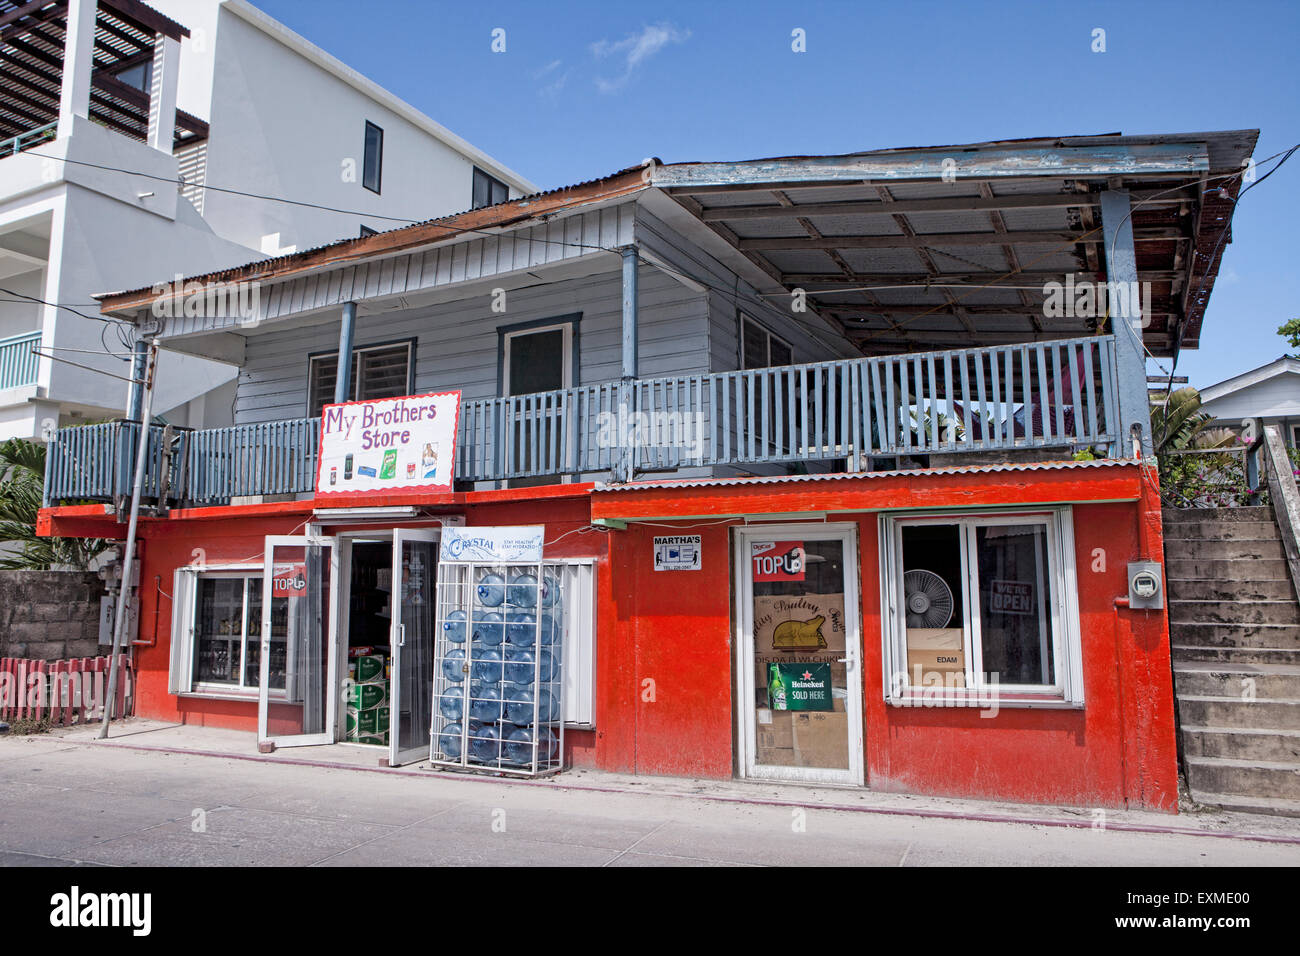 My Brothers Store front in San Pedro, Ambergris Caye, Belize, Central America. Stock Photo